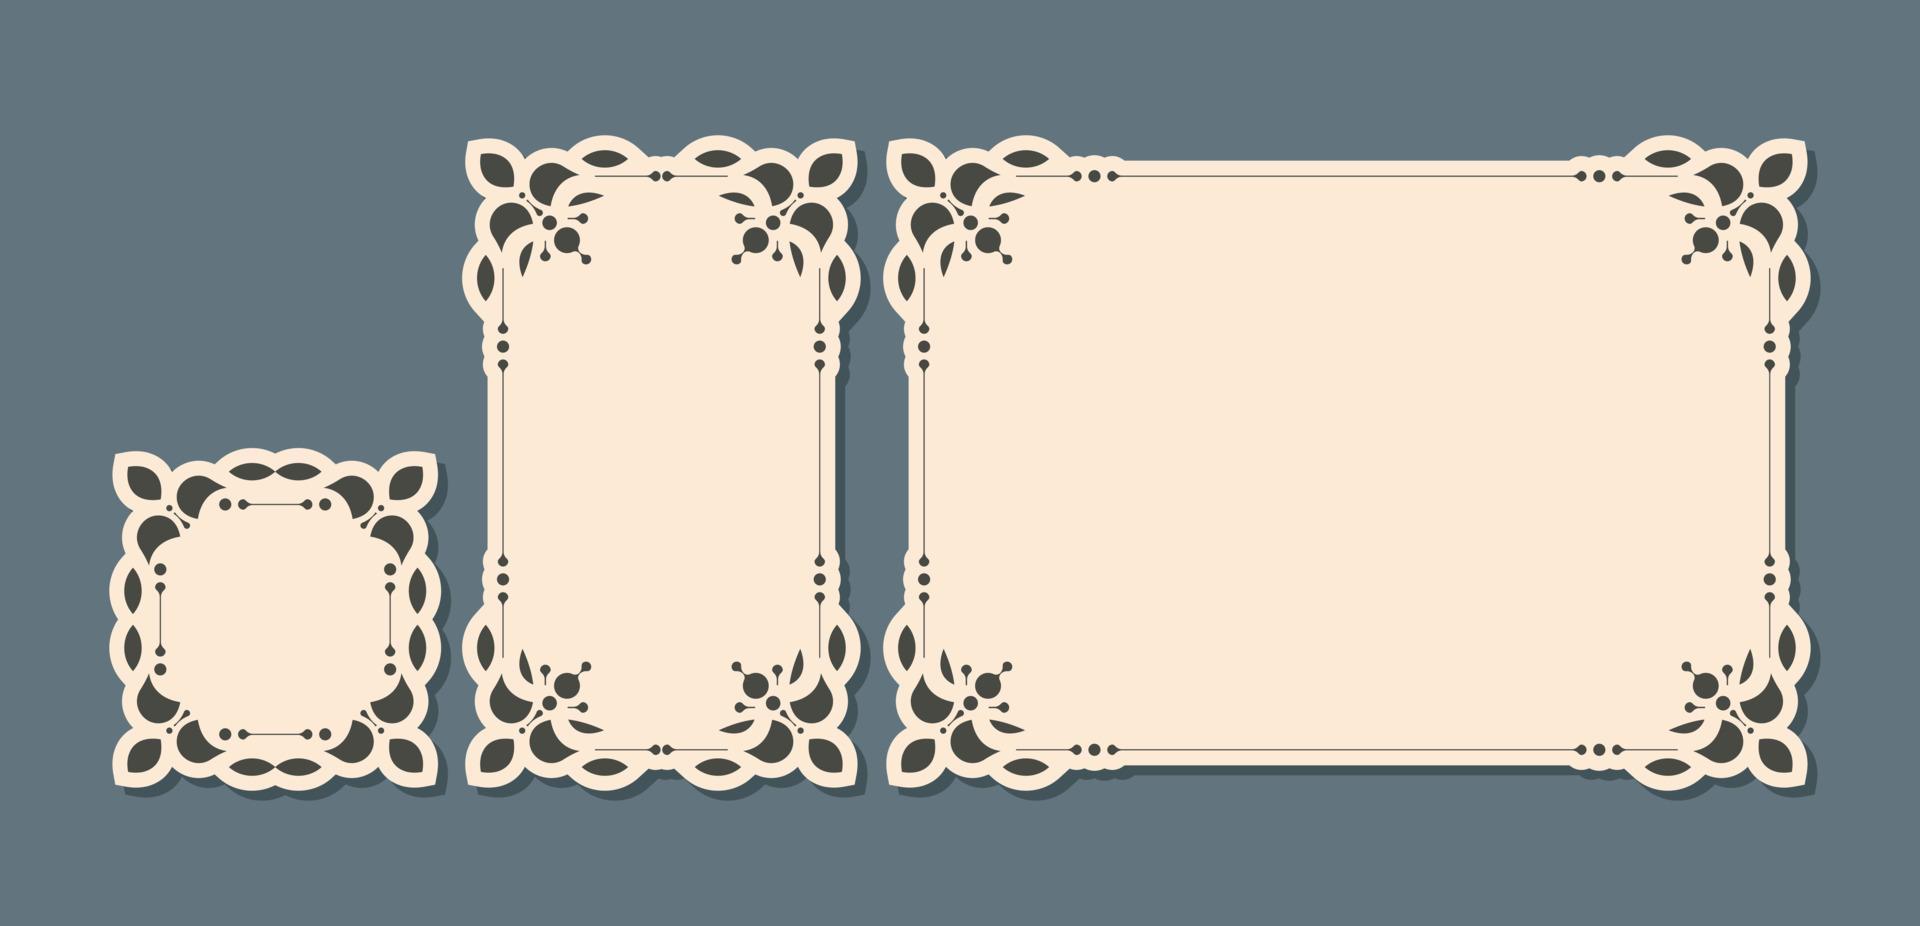 Vector isolated vintage label design with frame